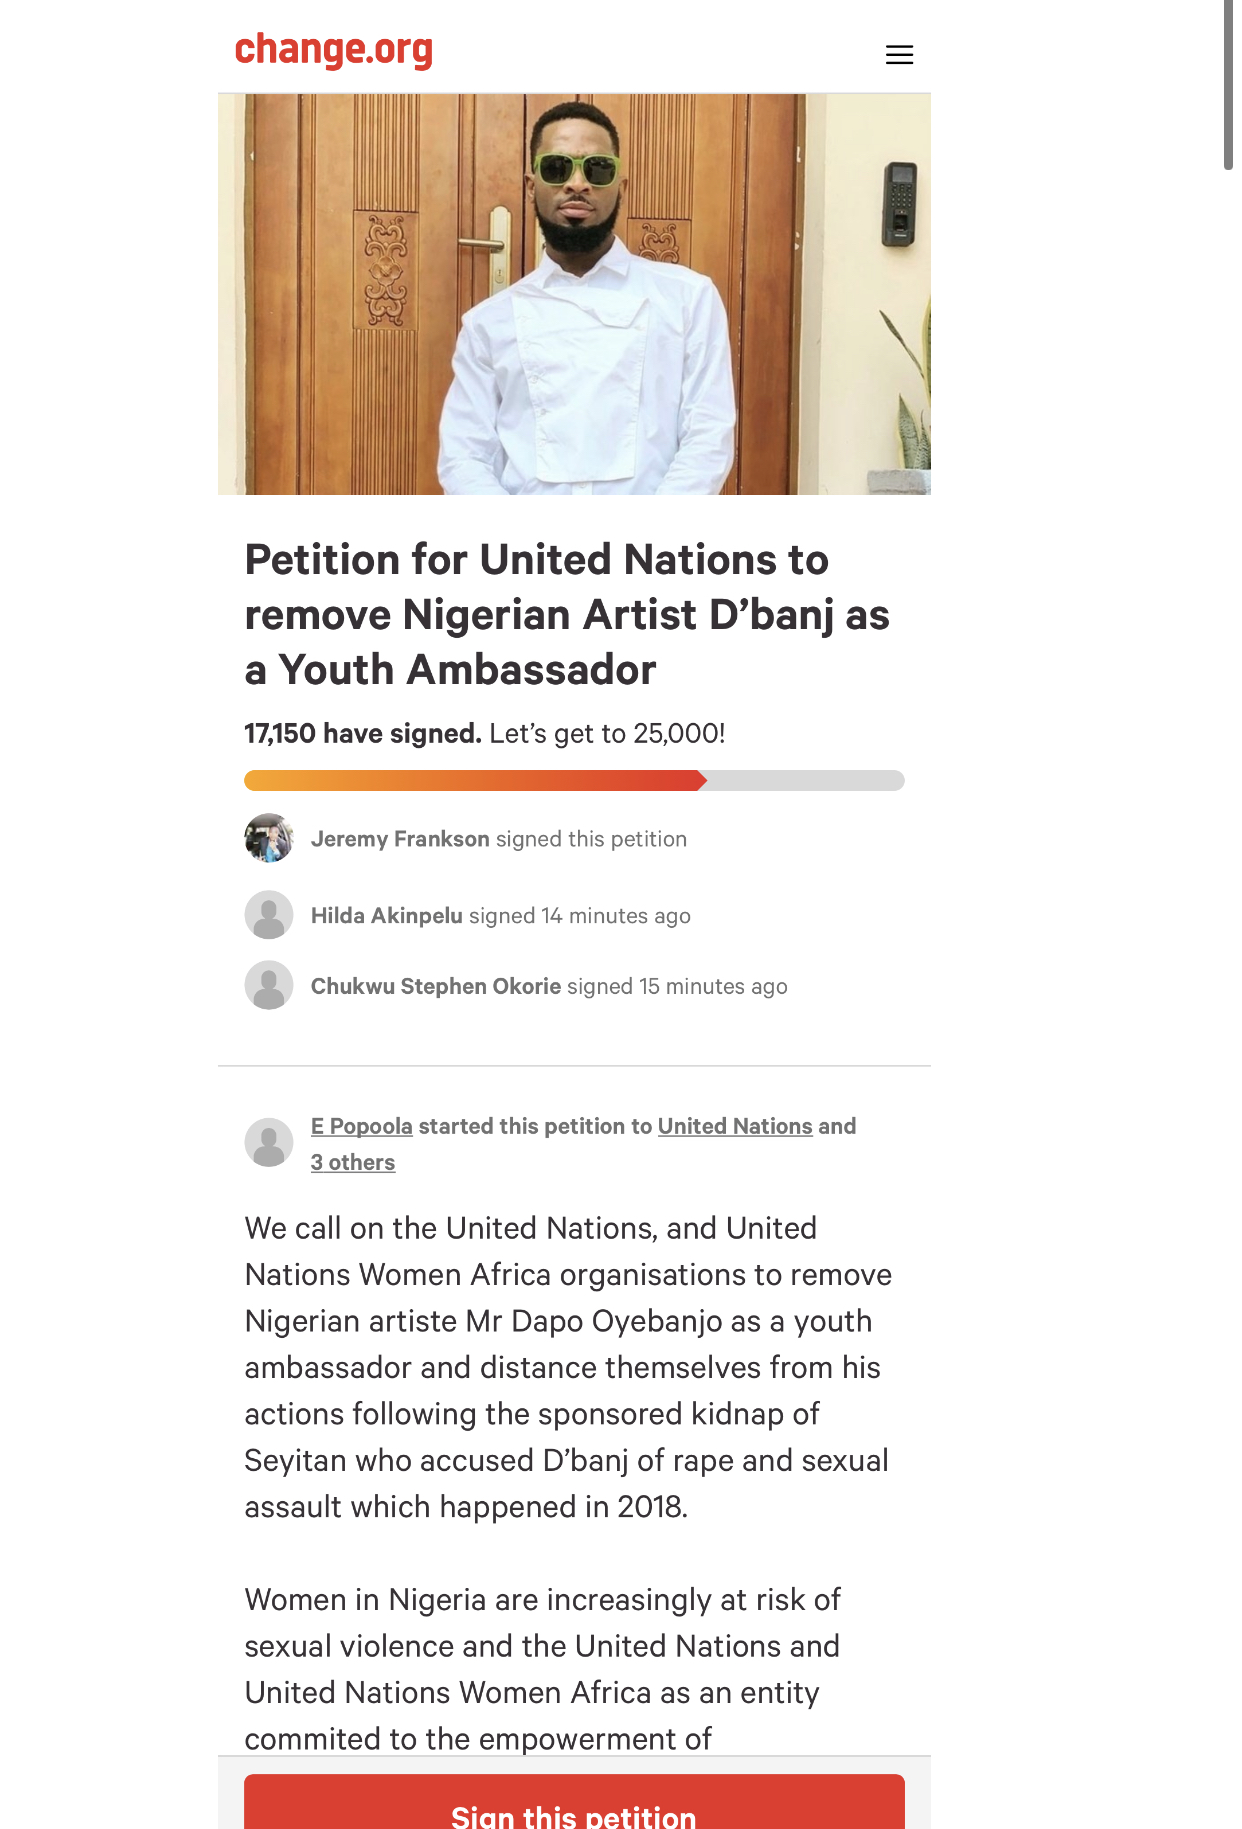 Screenshot of the petition